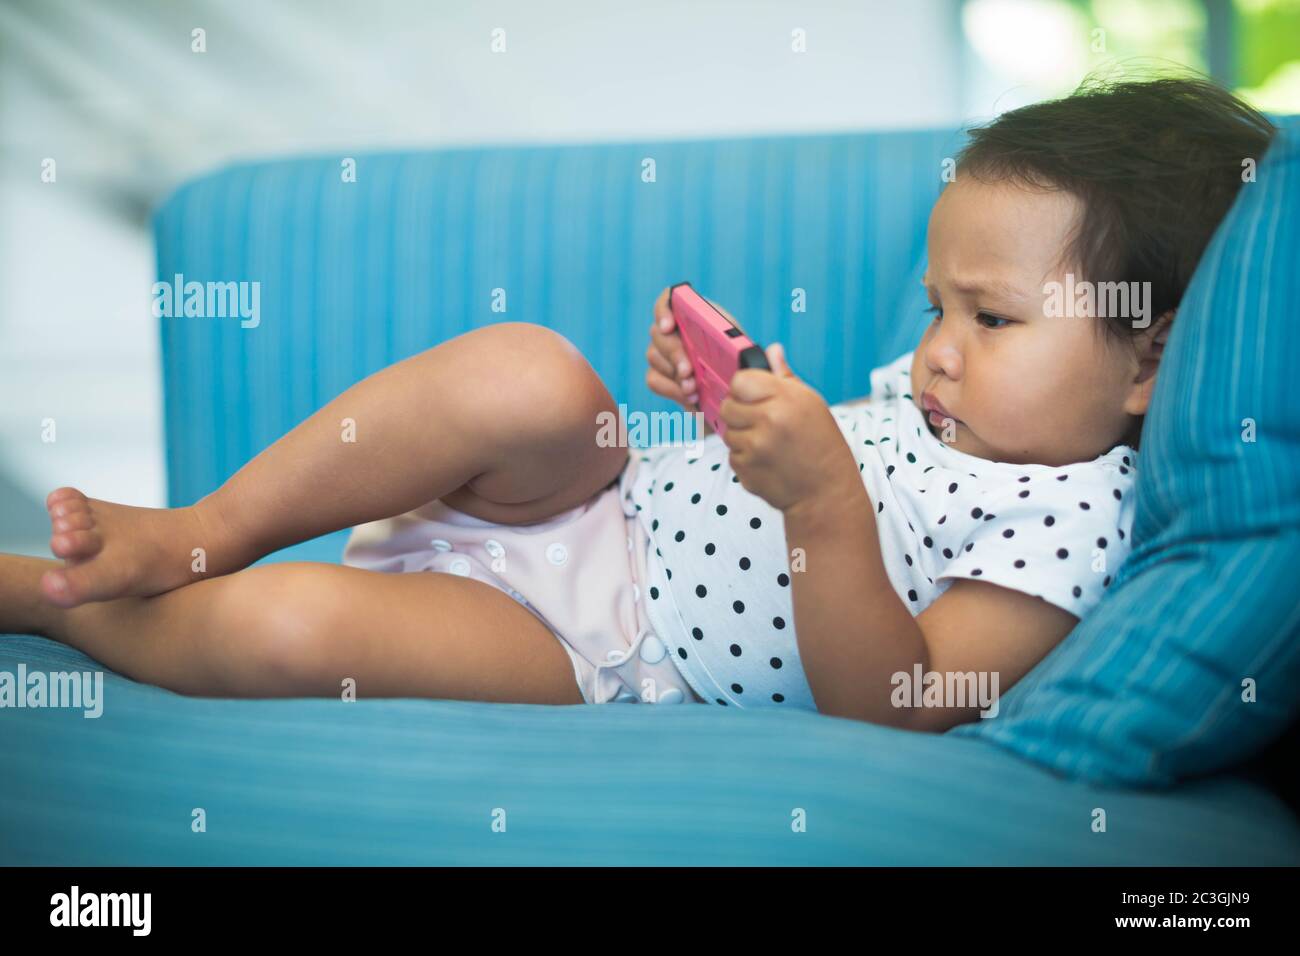 Chubby baby using a pink cell phone by herself on the sofa. High quality photo Stock Photo